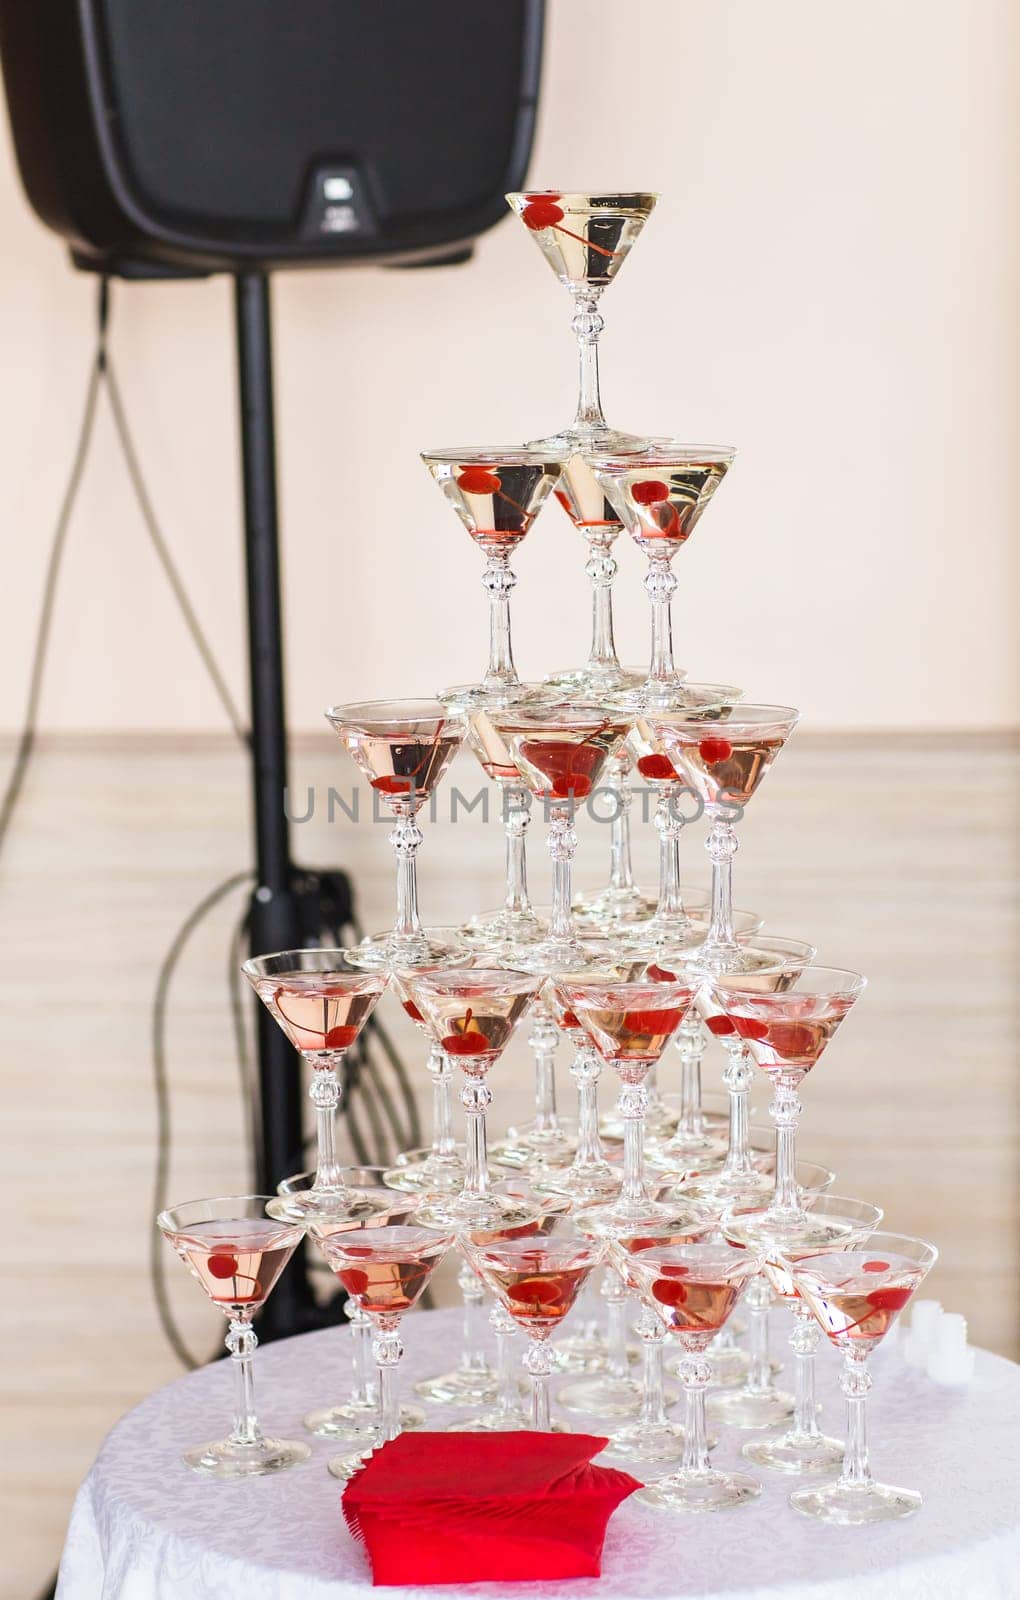 Champagne pyramid on event, party or wedding banquet reception.